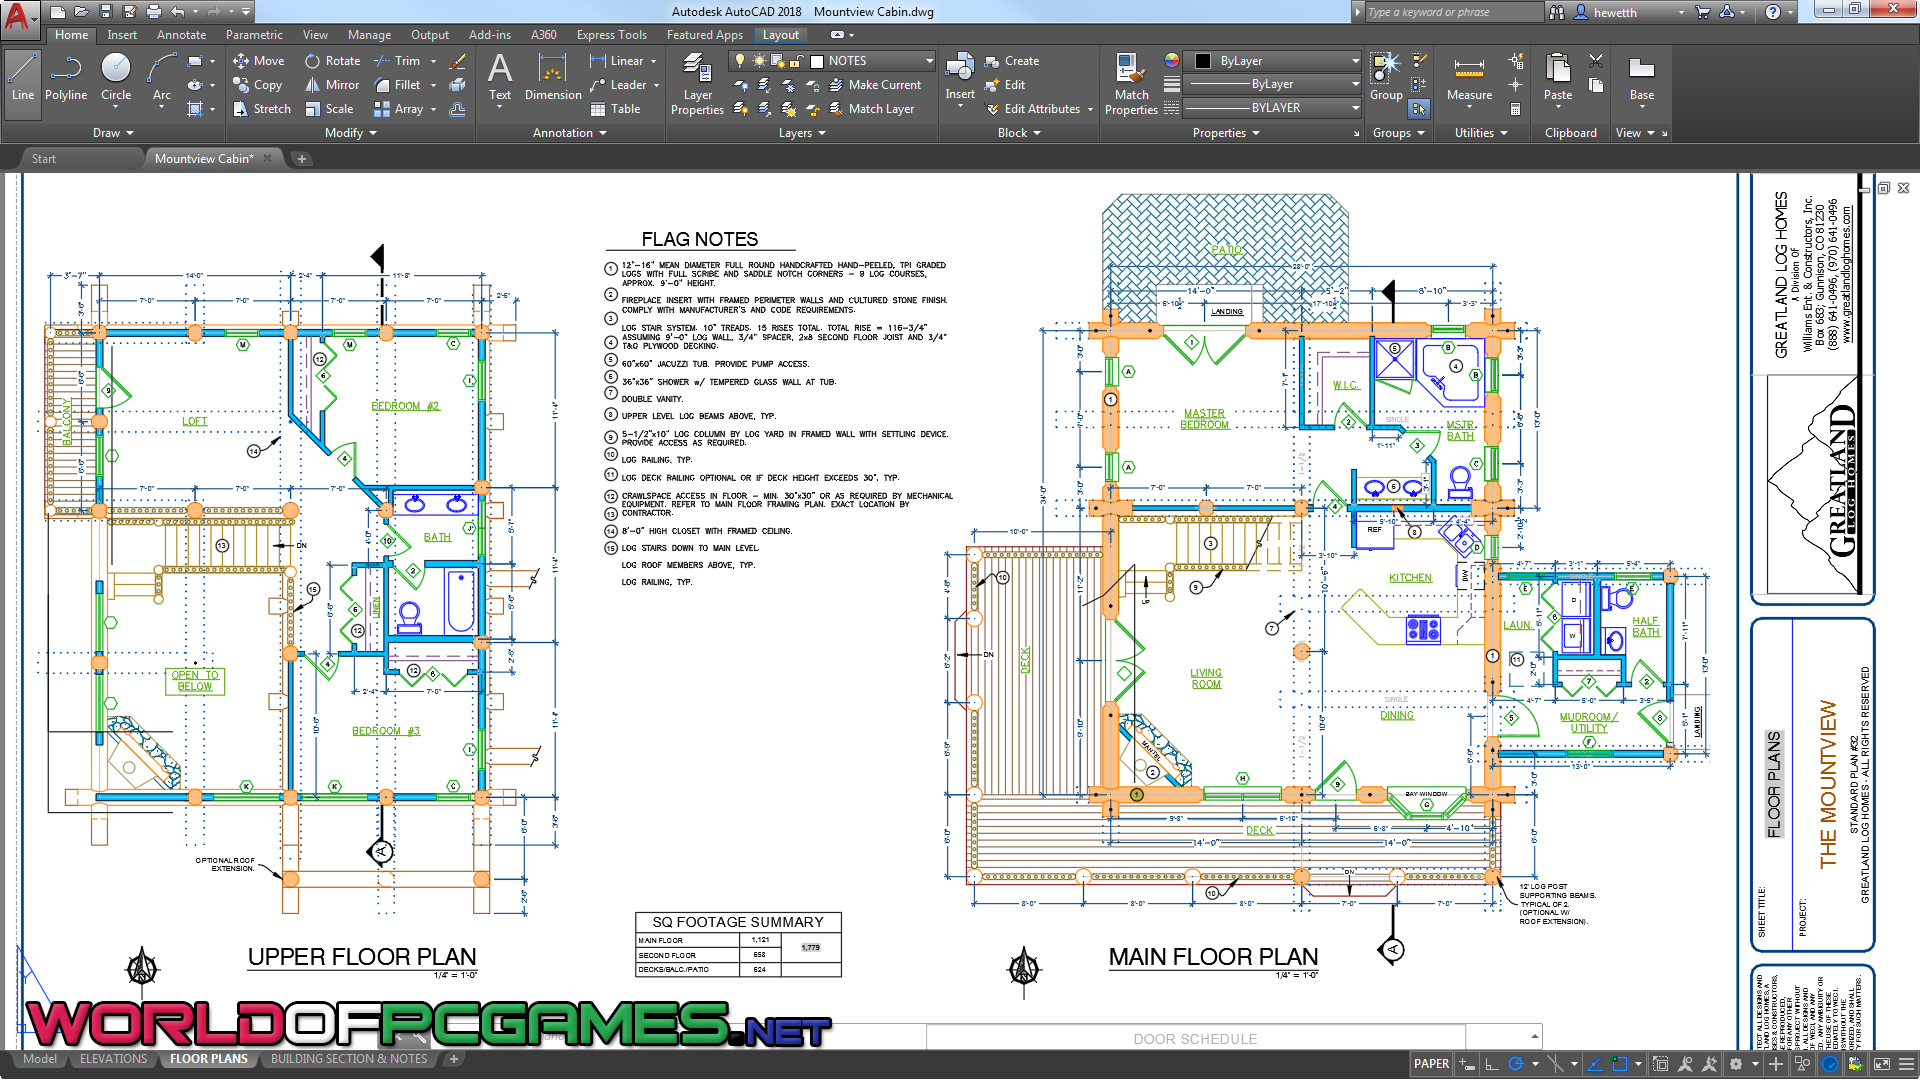 Autodesk Autocad 2017 For Mac Free Download By worldof-pcgames.net